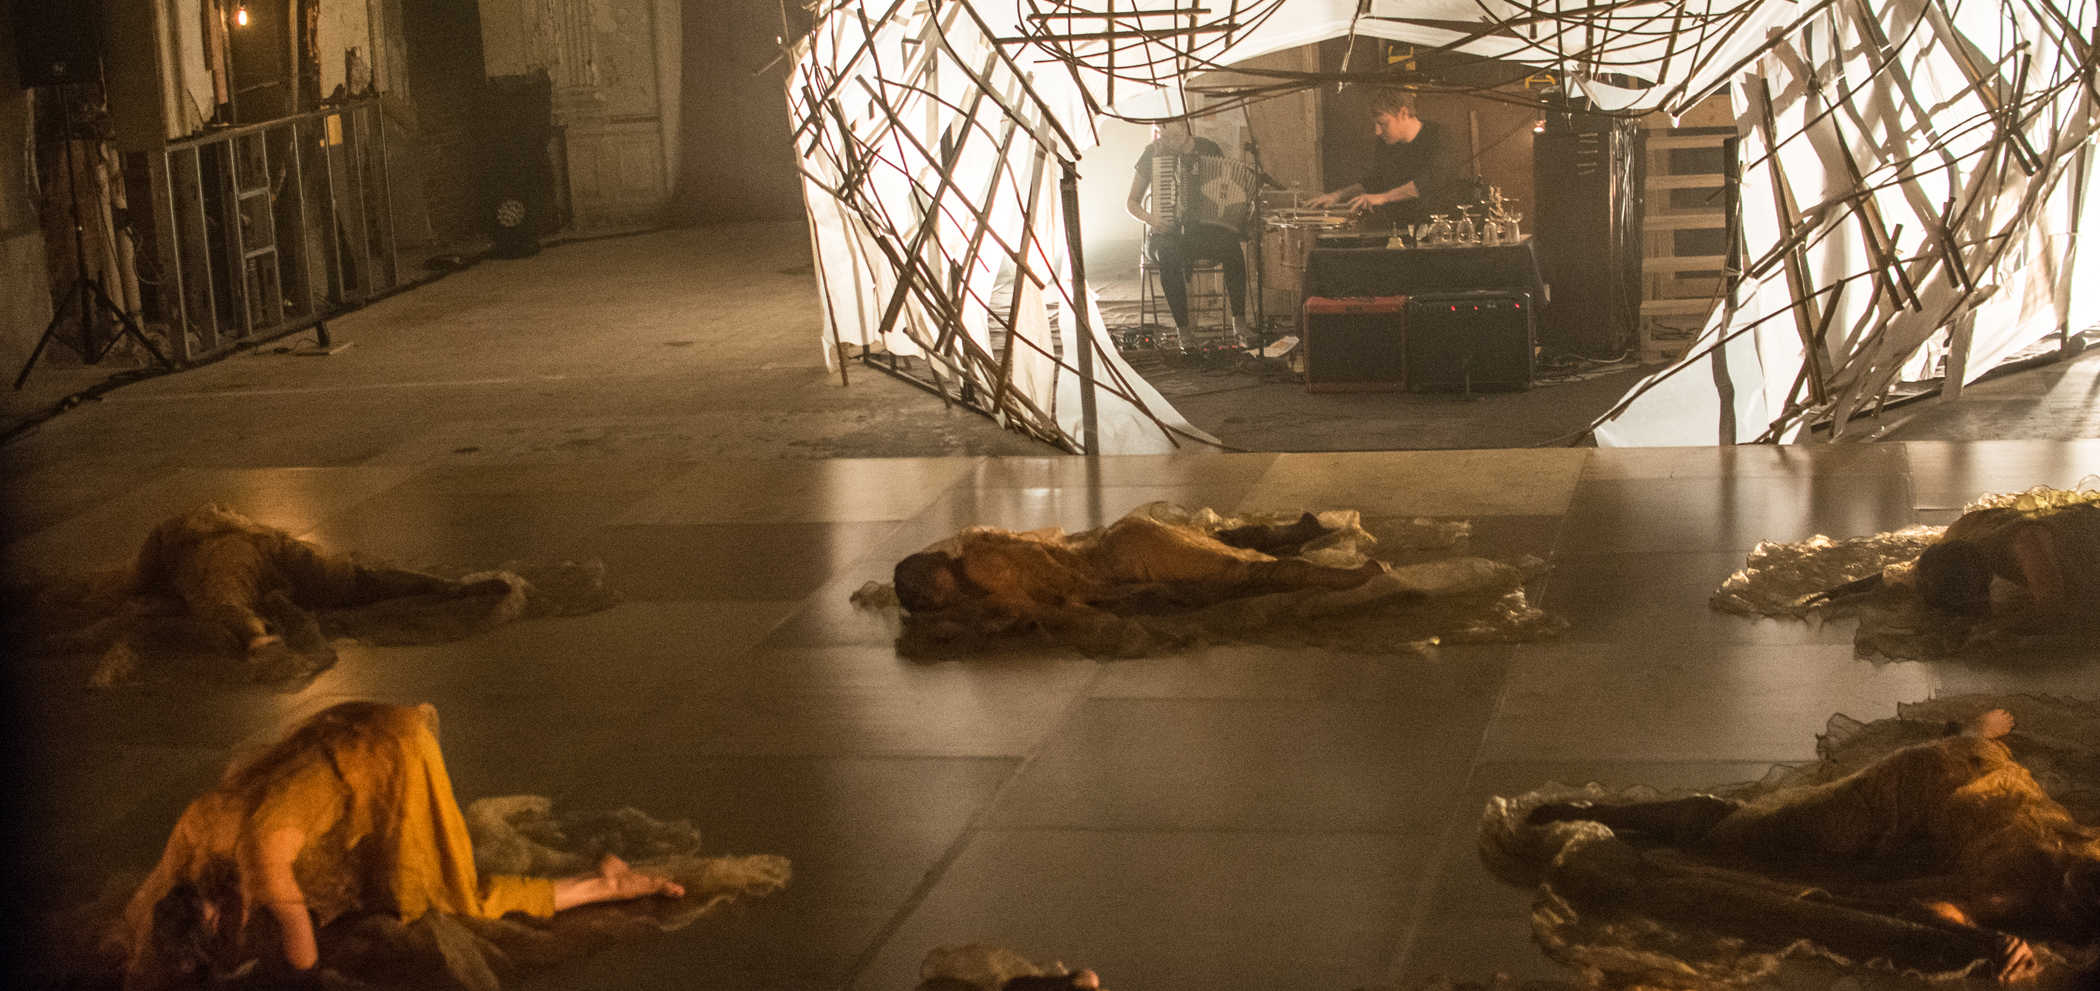 Bodies riddled across a Marley stage, all dressed in beige and earth tone fabrics. Many are lying face down on the floor, others in fetal position or child’s pose. In the background is a white tented structure with stick-like beams. Underneath the structure sits two musicians playing drums and a piano accordion.